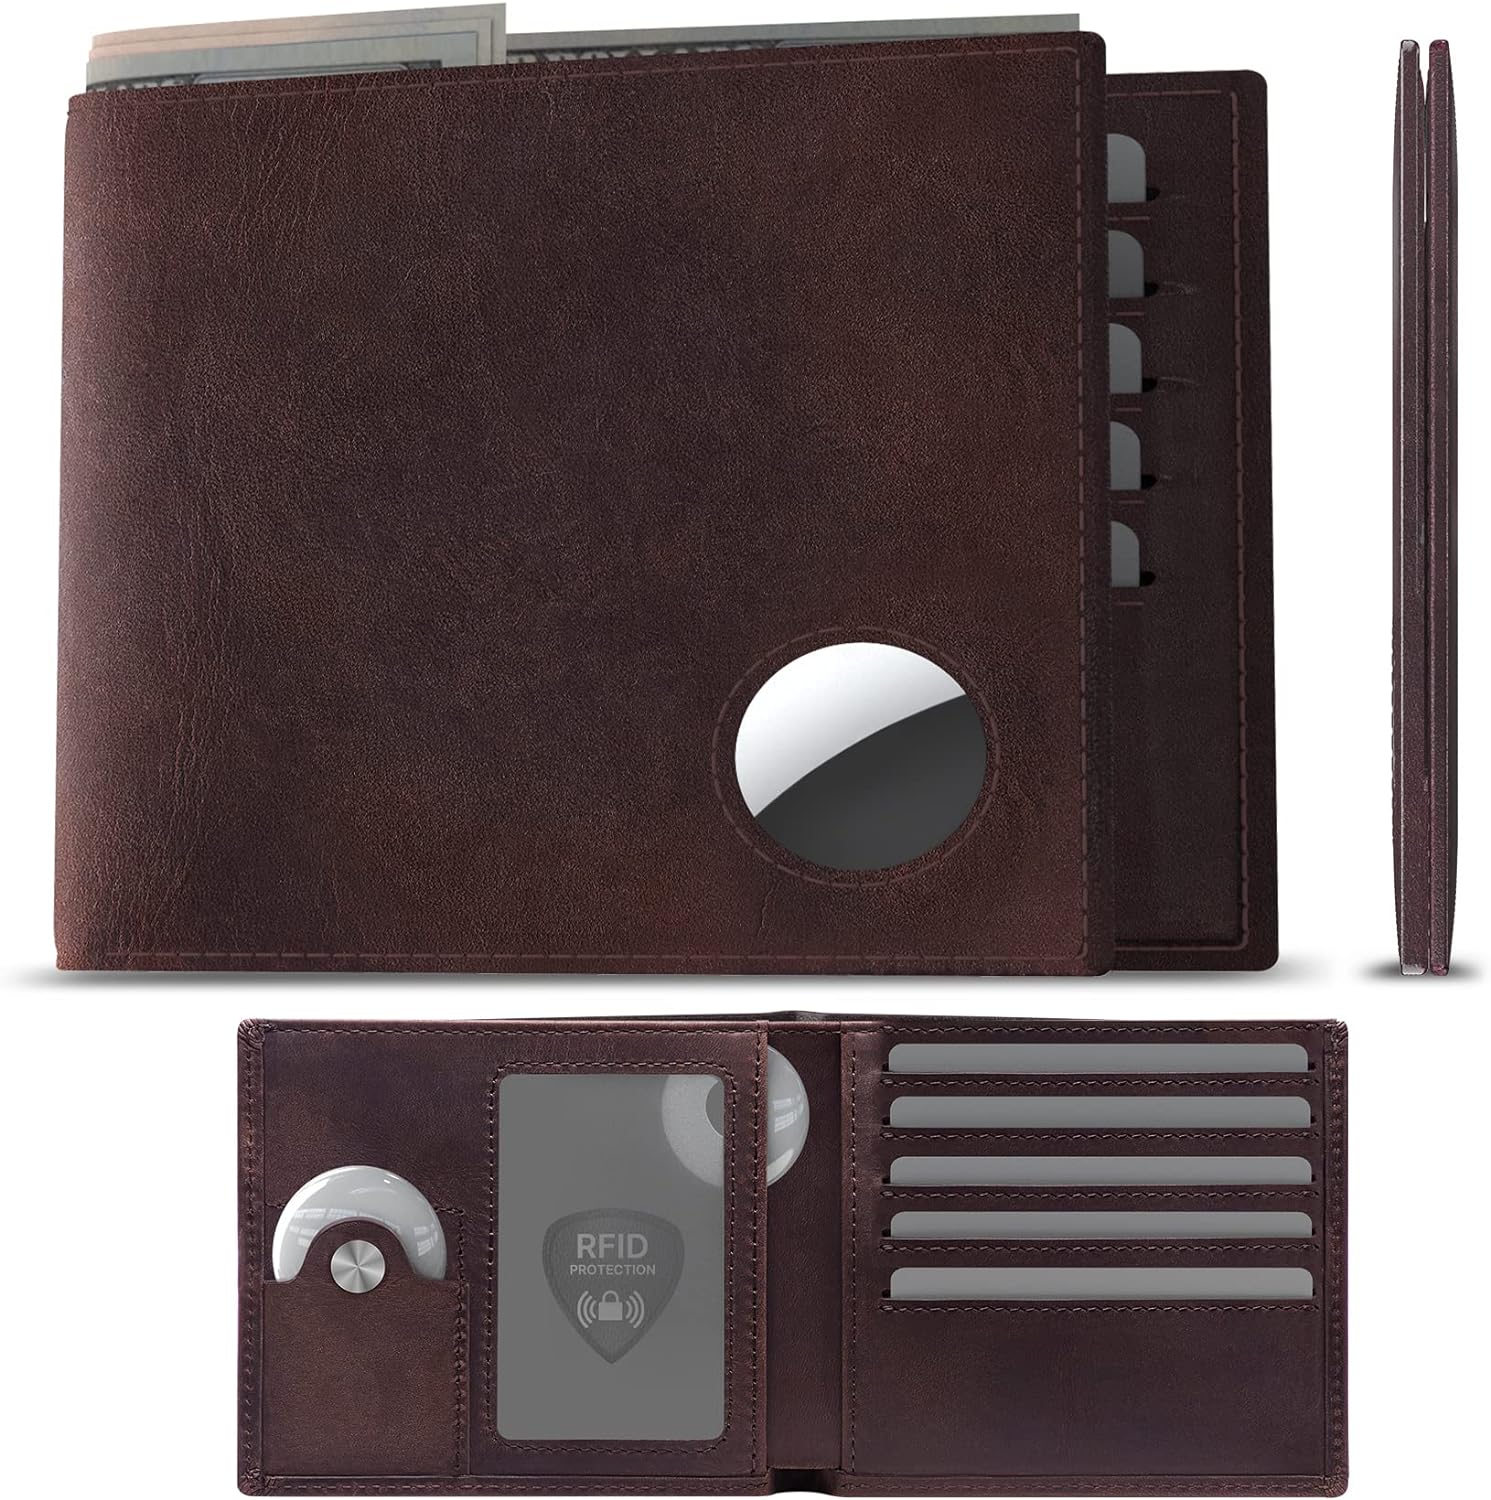 Men's Slim RFID Leather Wallet with AirTag Holder - Top Grain Bifold - Abbycart